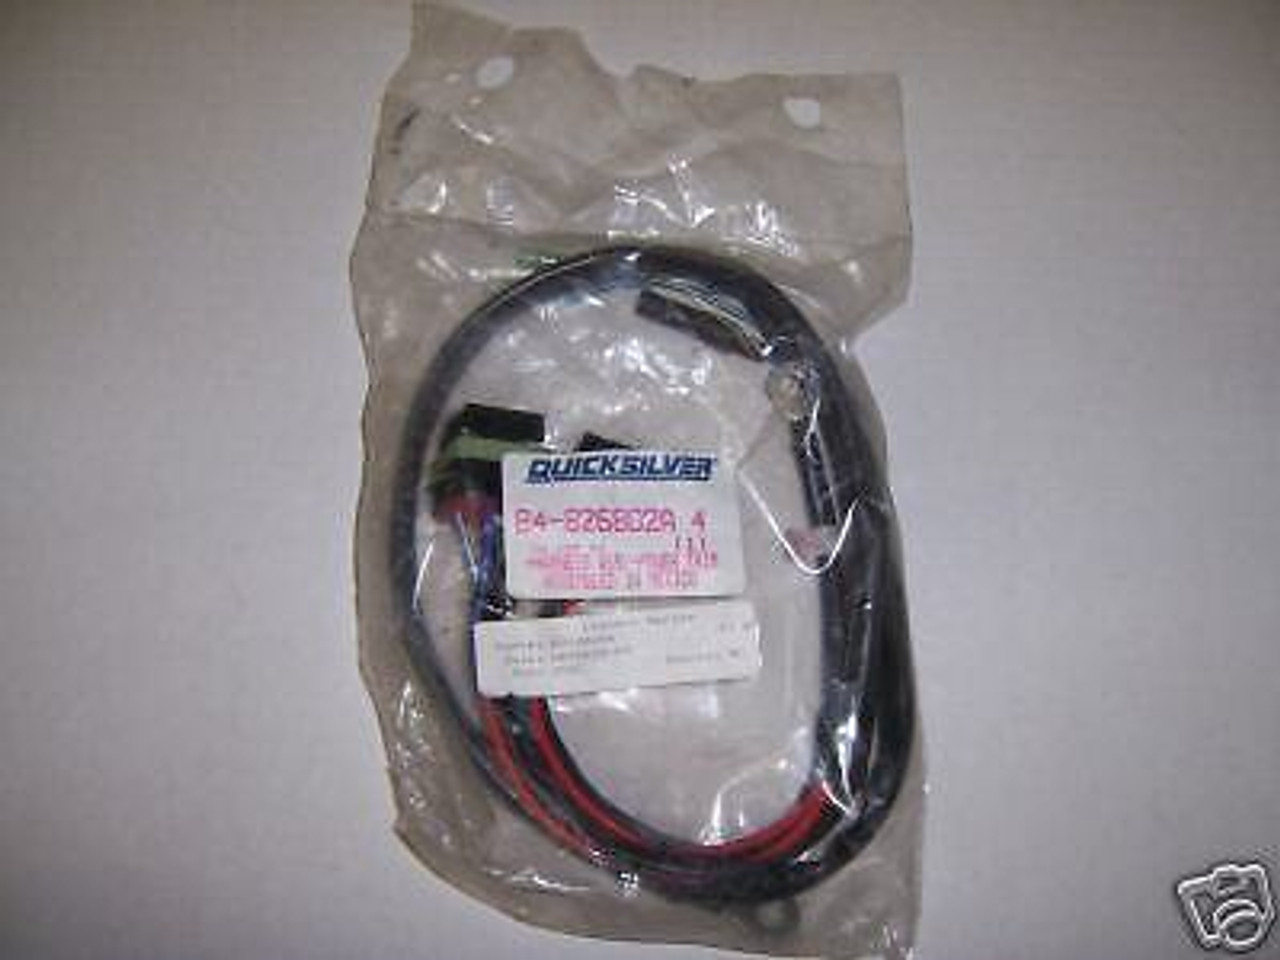 Mercury New OEM Power Trim & Tilt Wire Wiring Harness Cable 84-826802A4